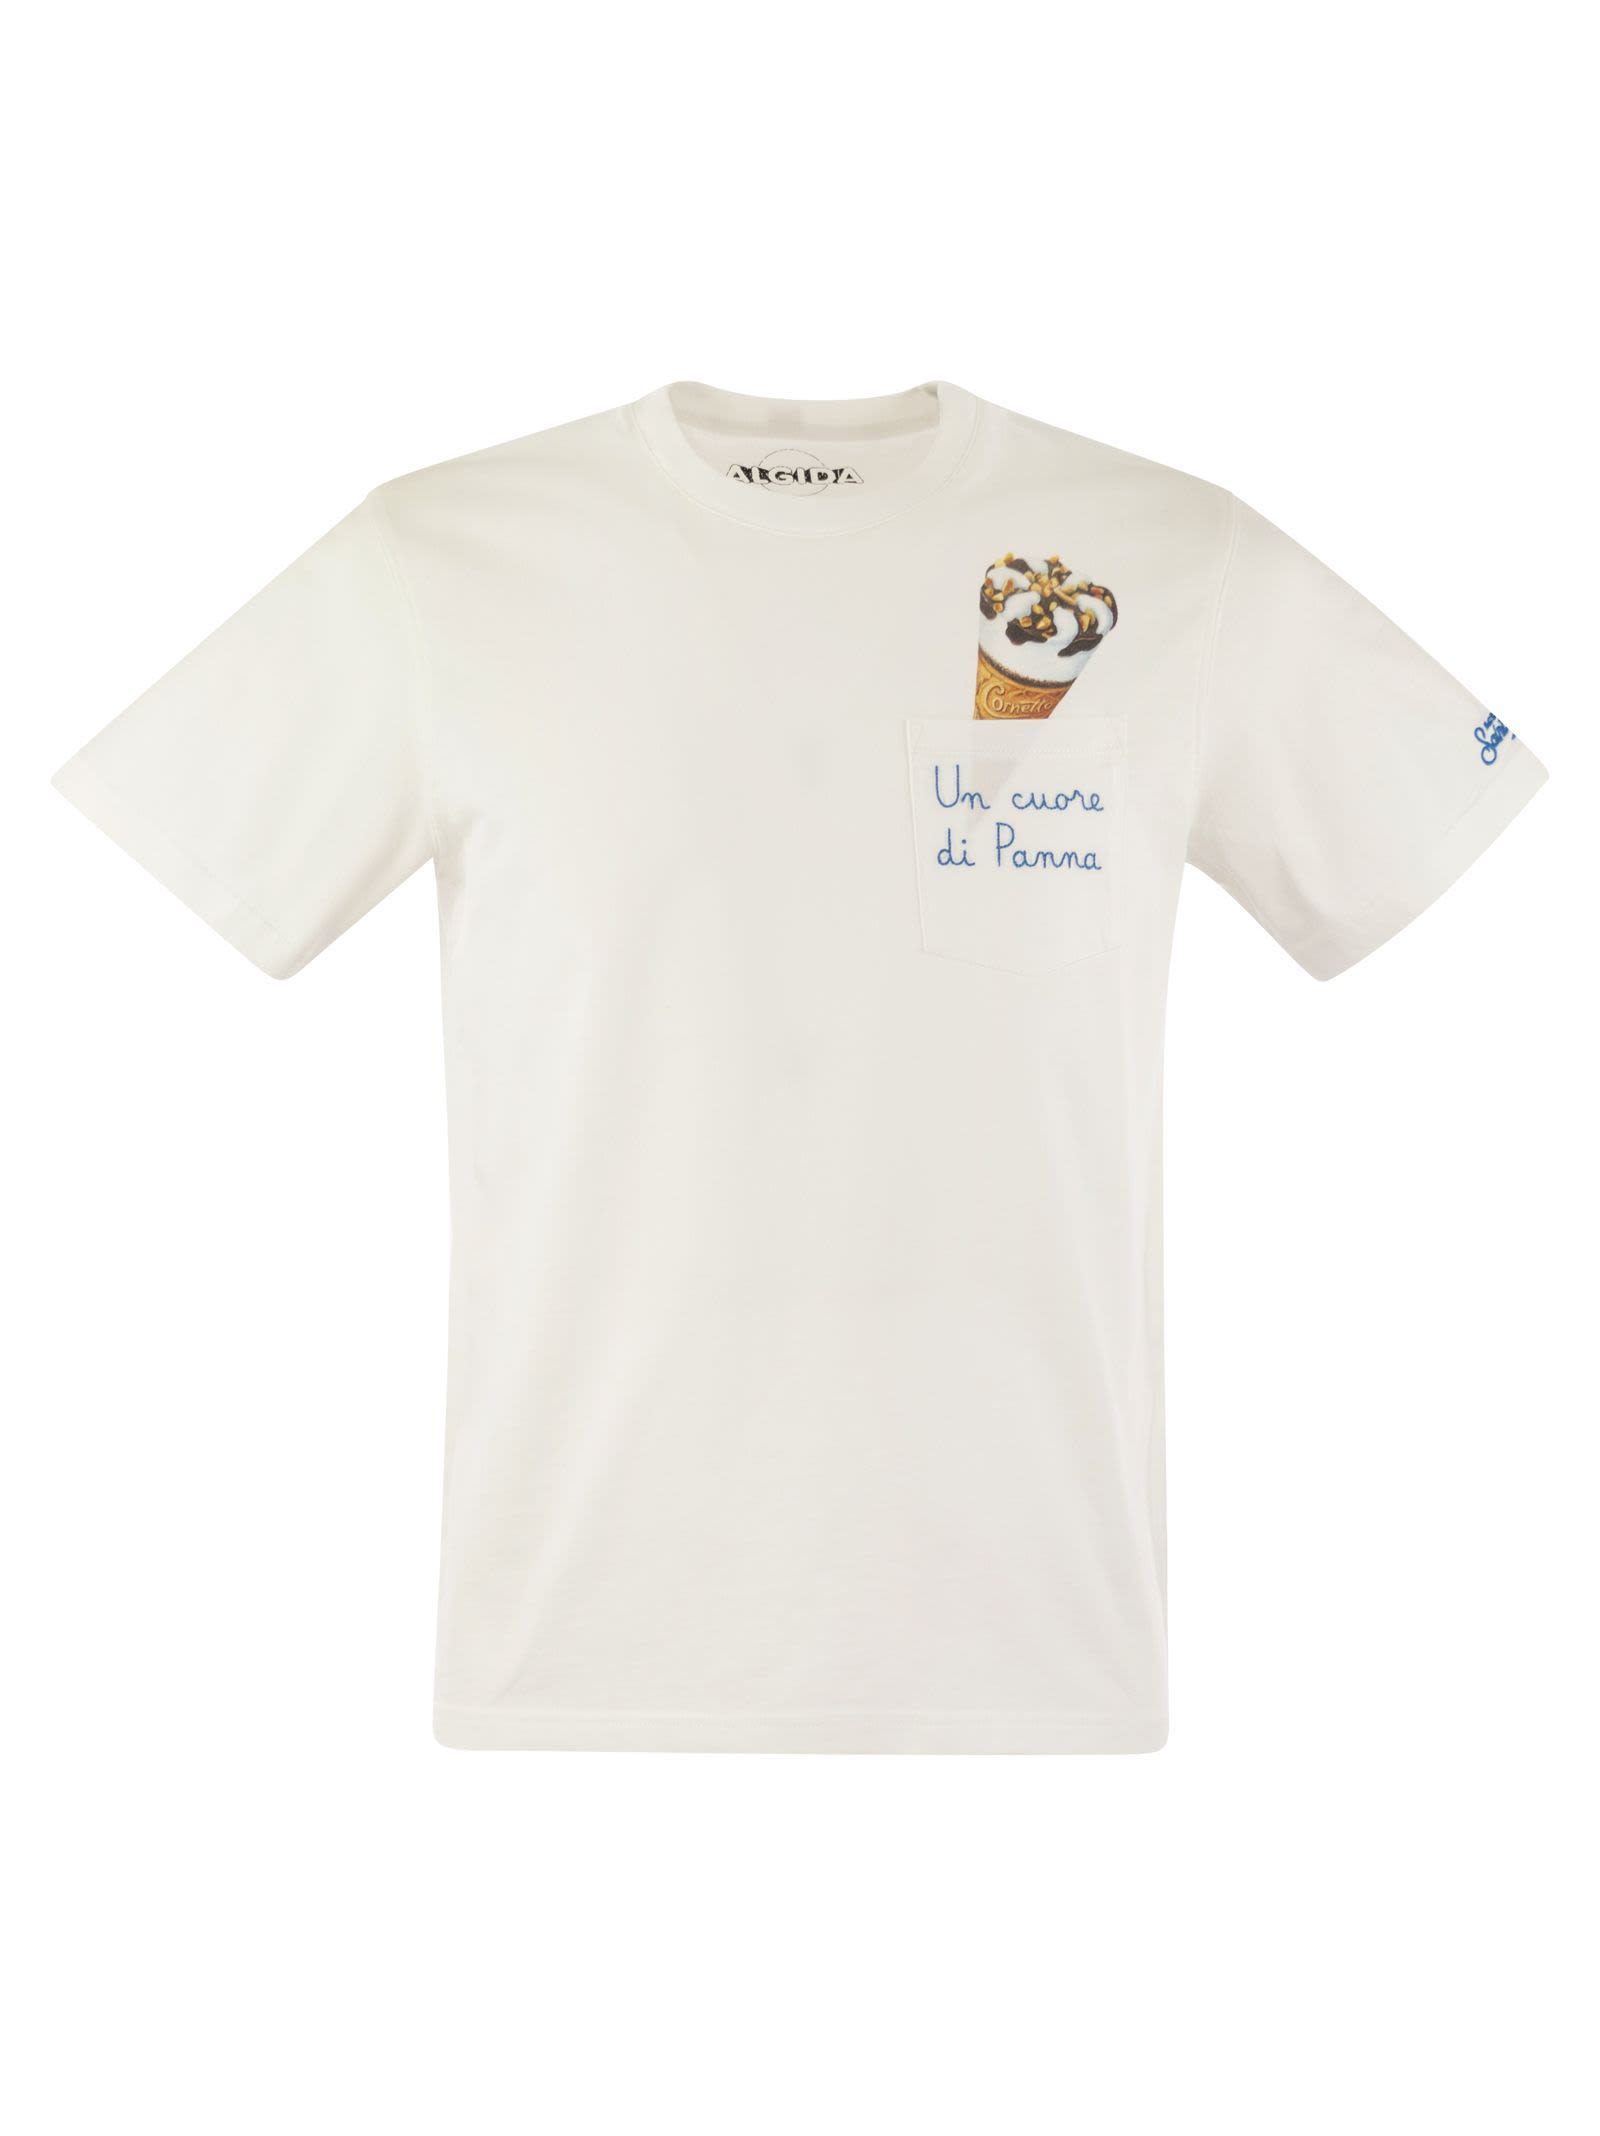 Austin - T-shirt With Embroidery On Chest Algida Limited Edition